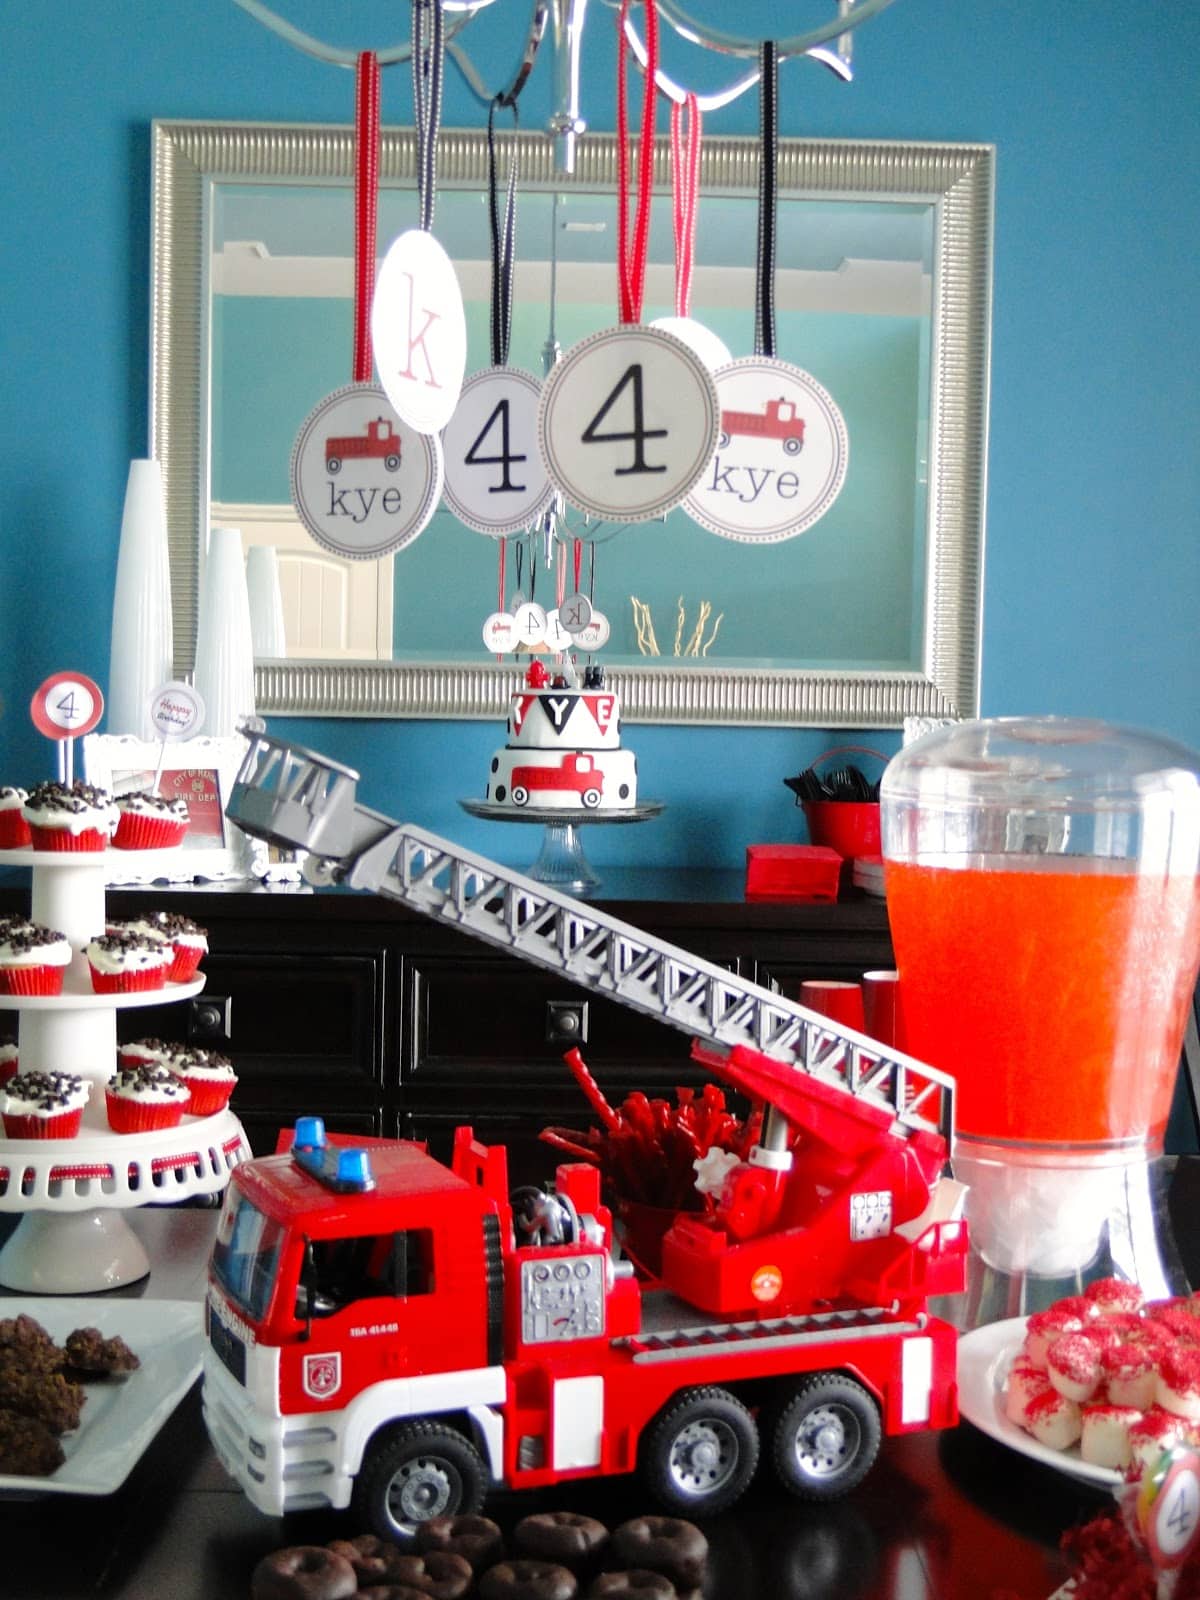 Fire Truck Birthday Party Ideas: Food, Decorations & More!